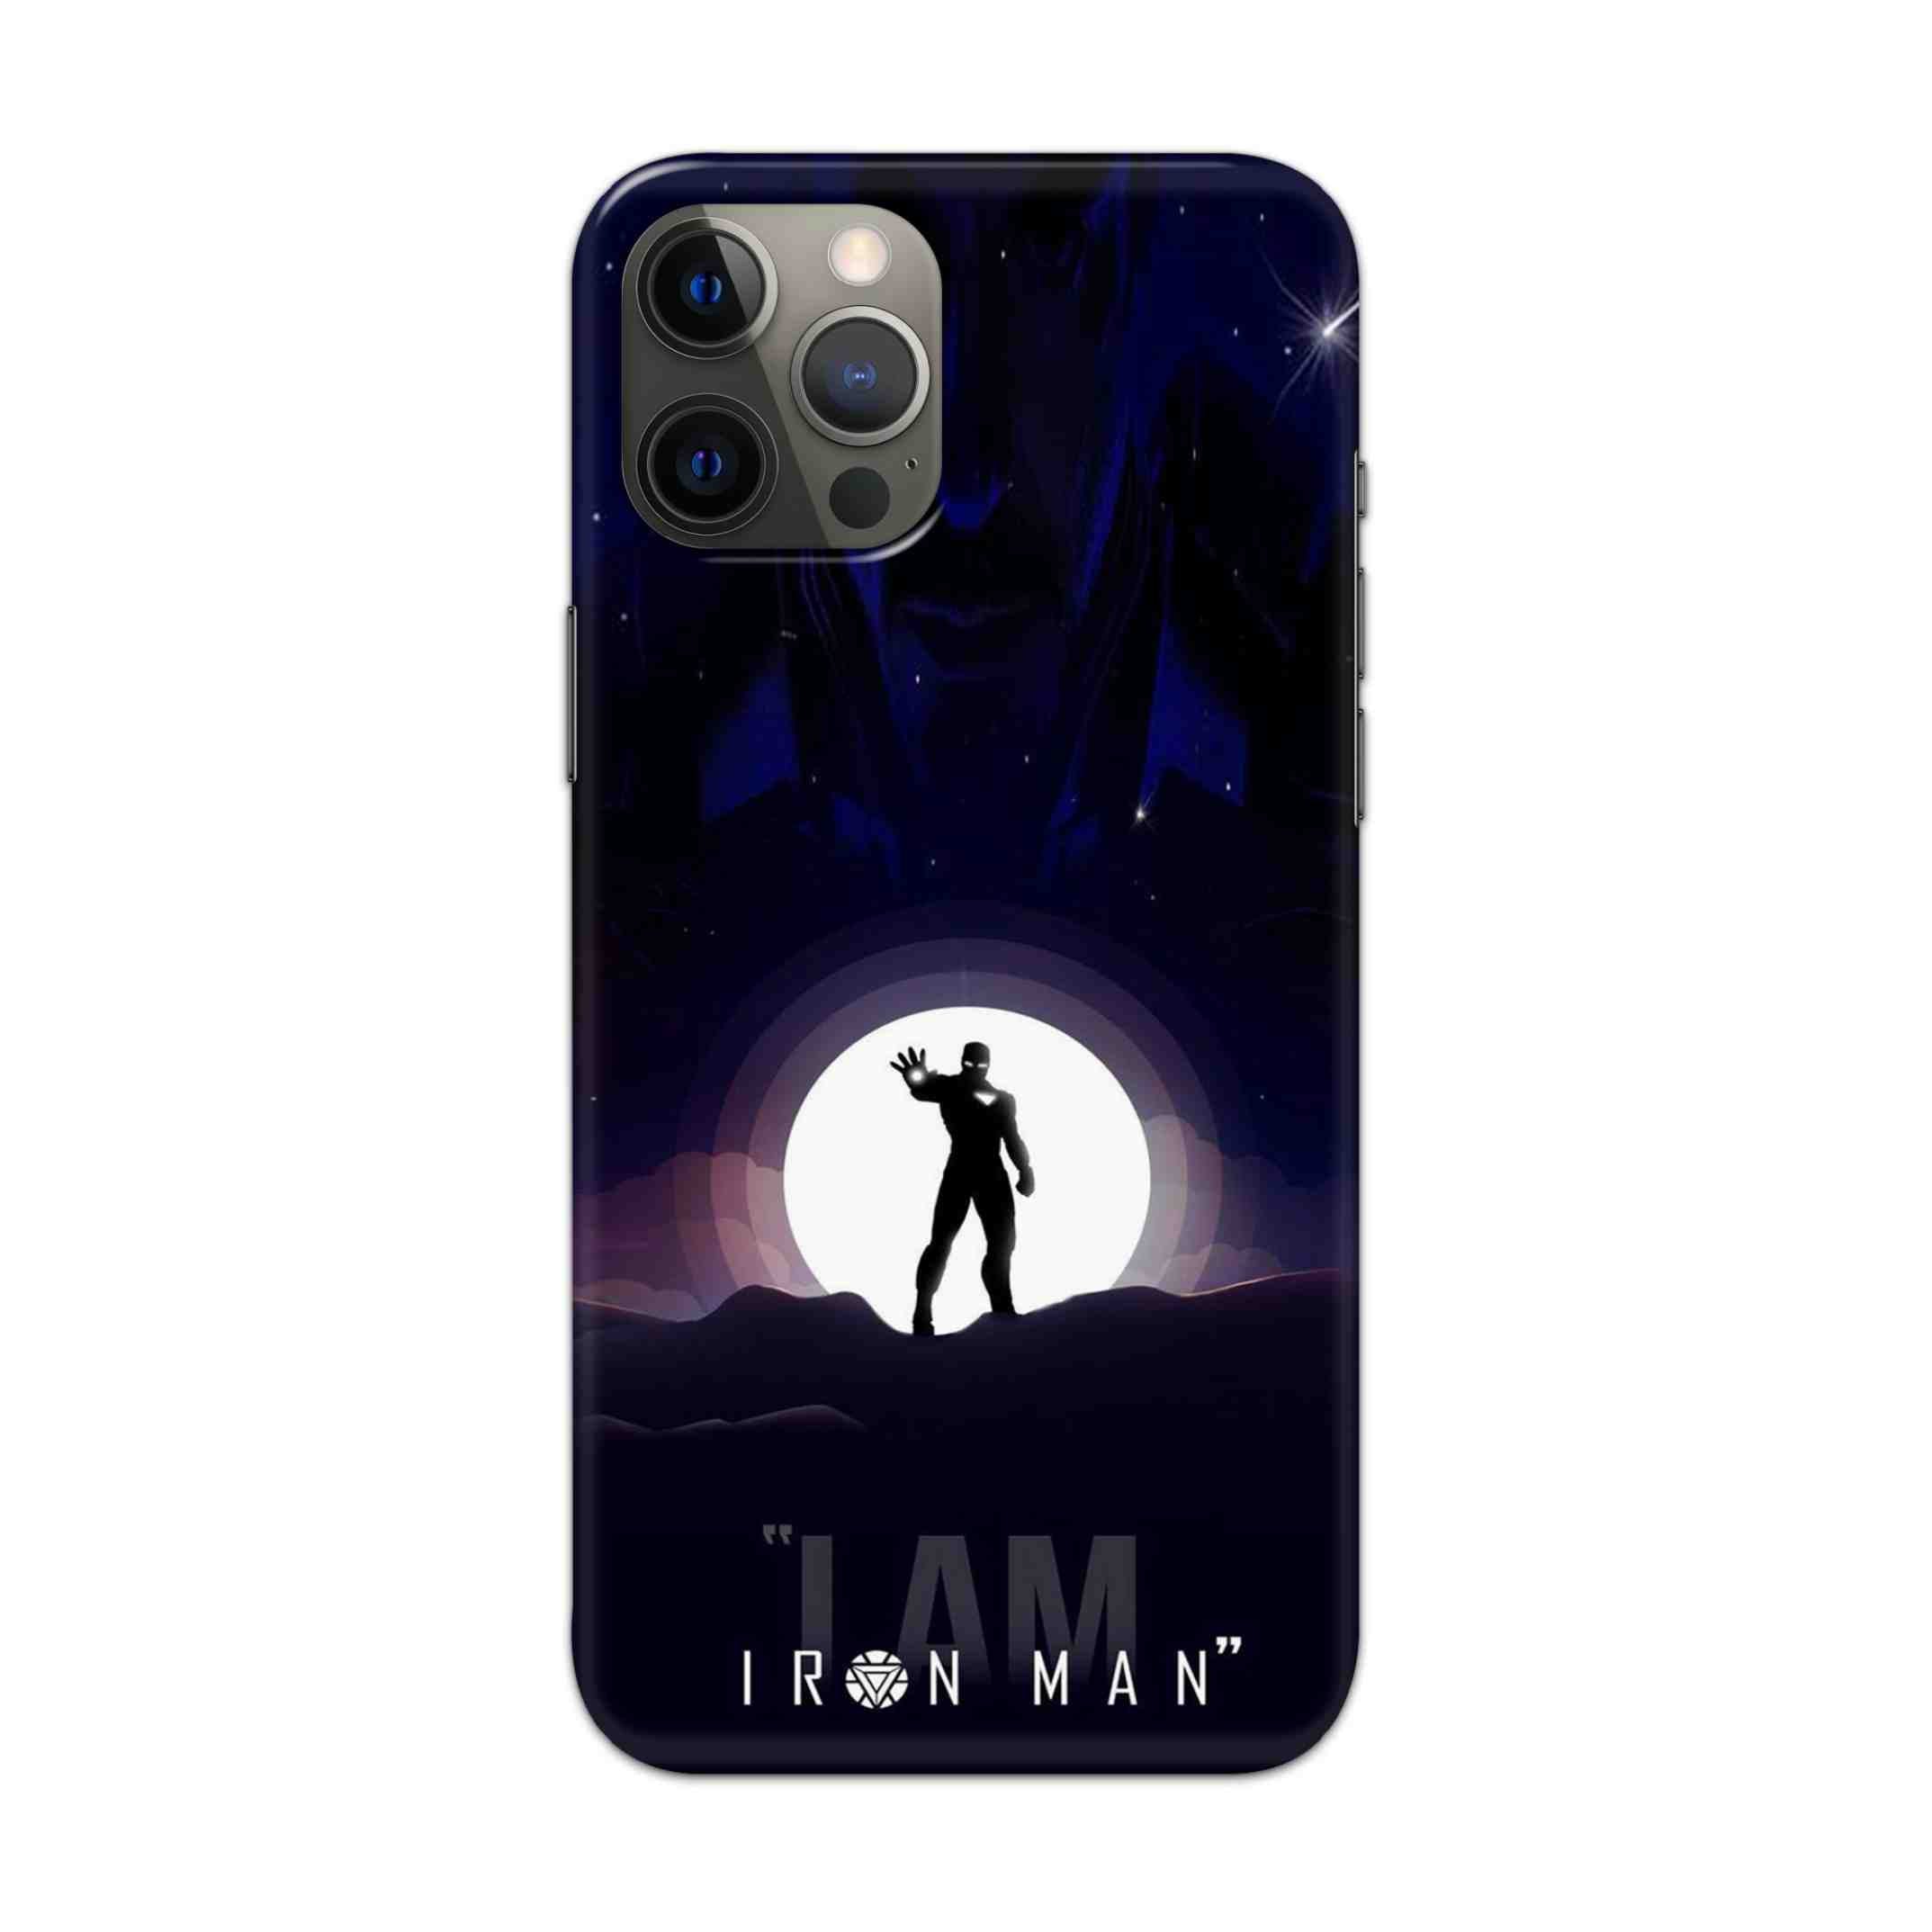 Buy I Am Iron Man Hard Back Mobile Phone Case/Cover For Apple iPhone 12 pro max Online